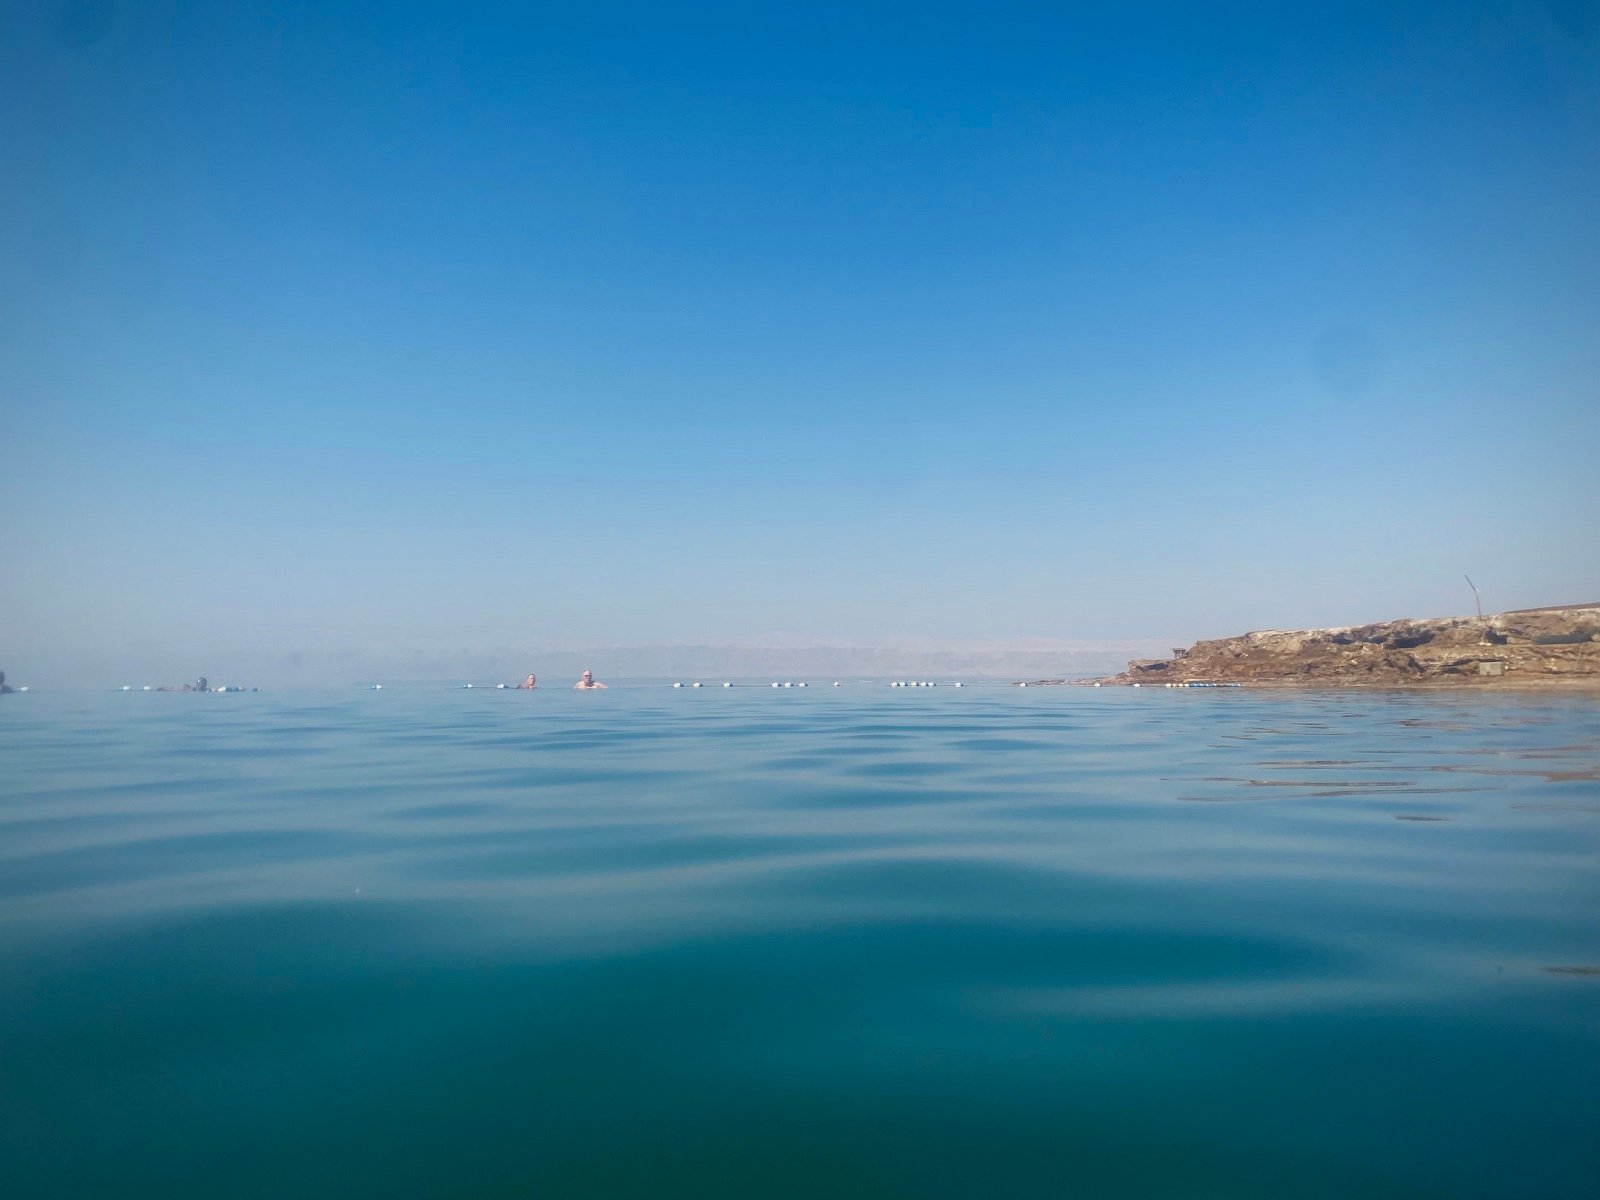 Two people in the far distance swimming in the Dead Sea